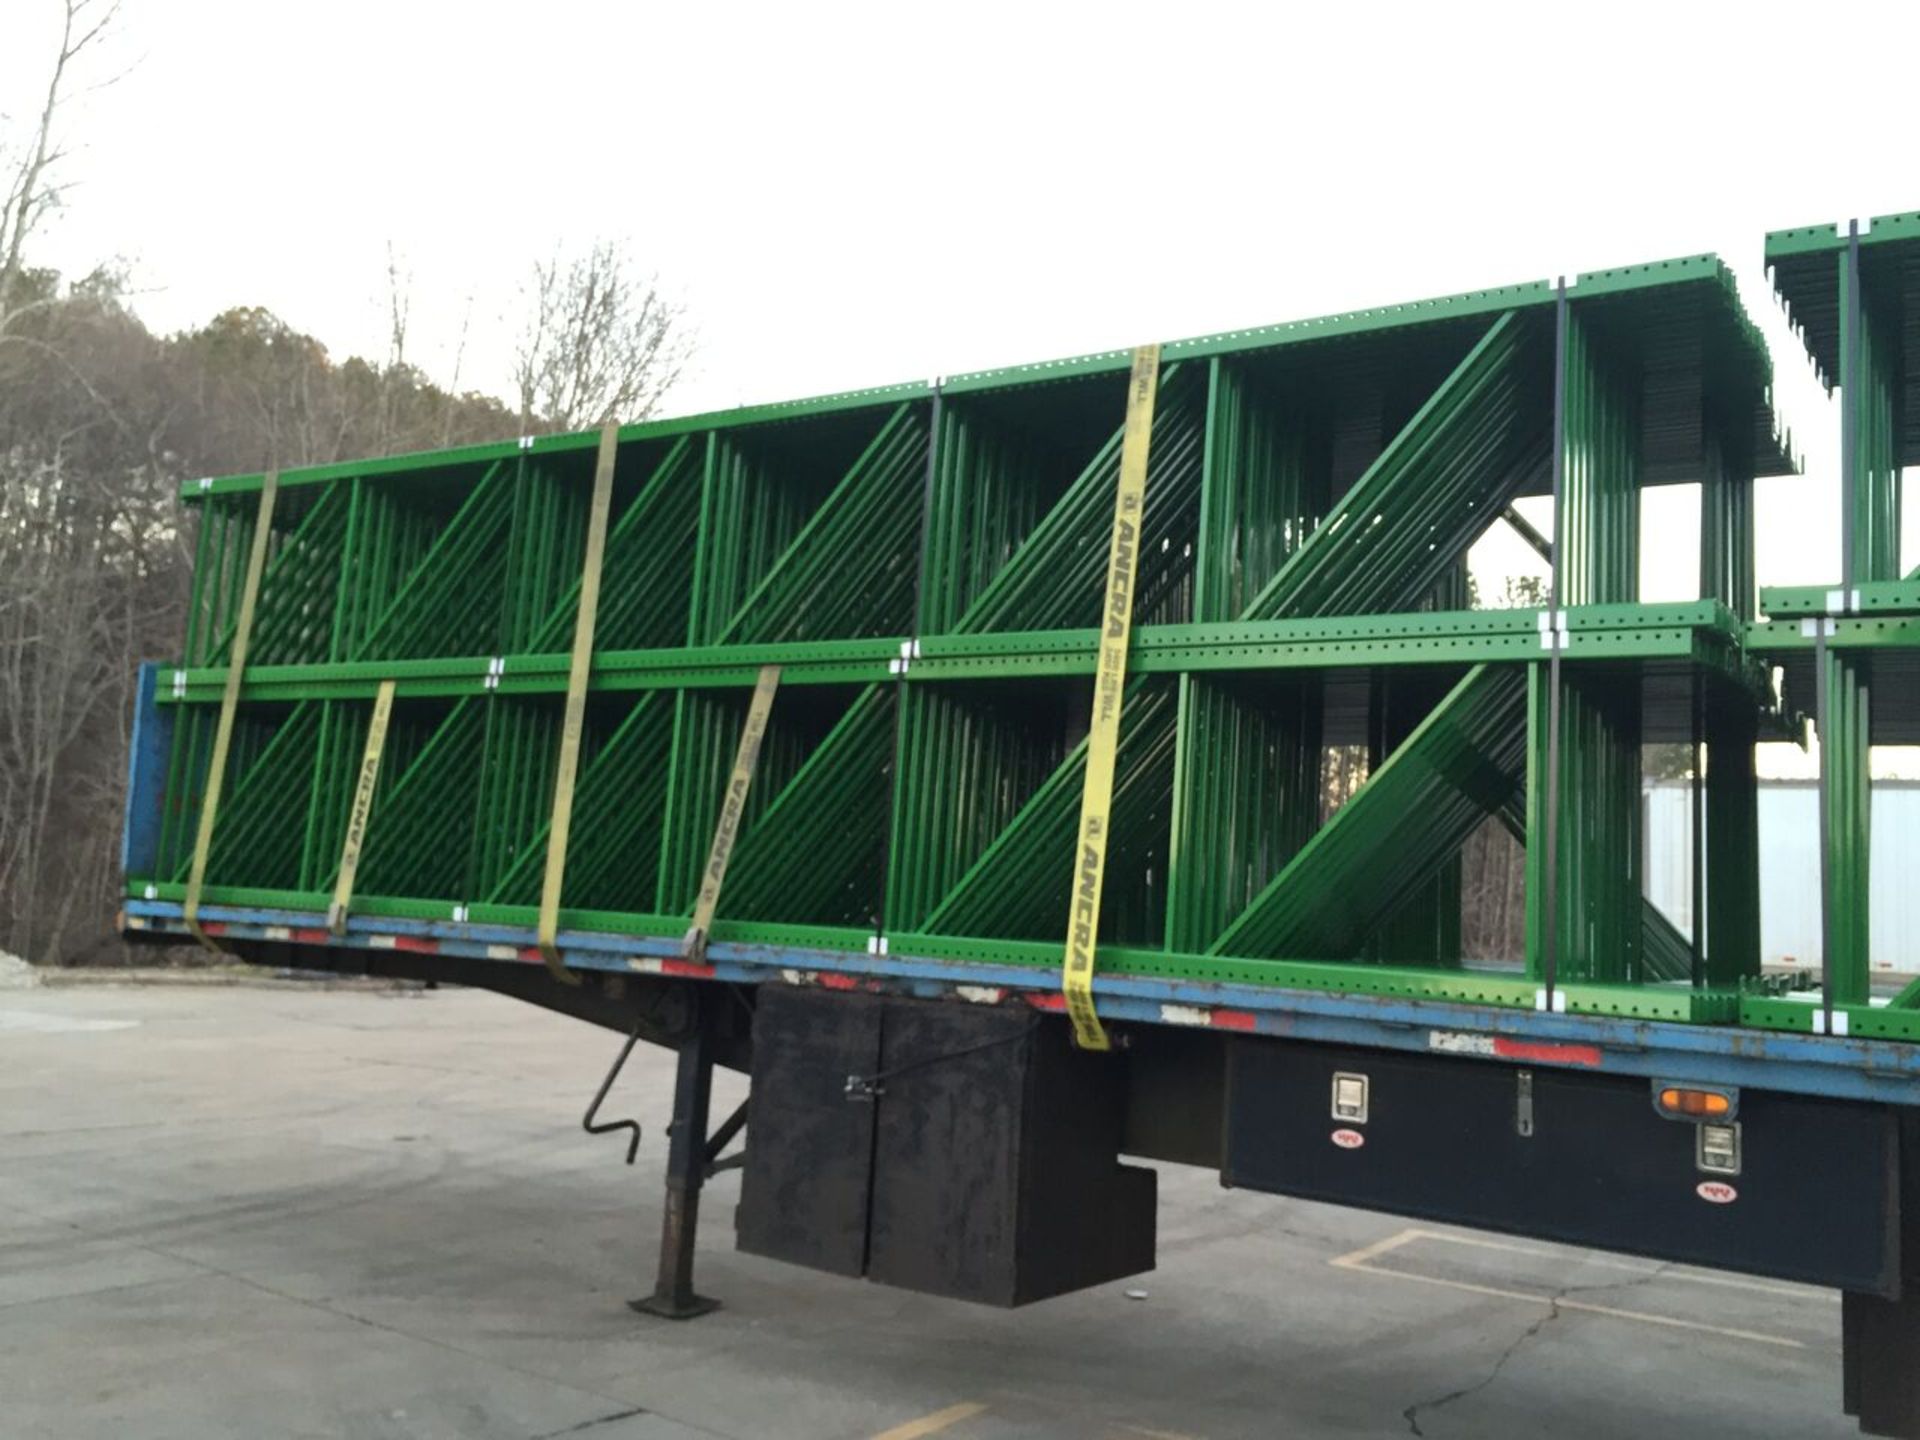 TRUCK LOAD OF TEARDROP UPRIGHTS, SIZE: 288"H X 42"D, 3" X 3" POST, 120 PCS TOTAL - Image 2 of 2